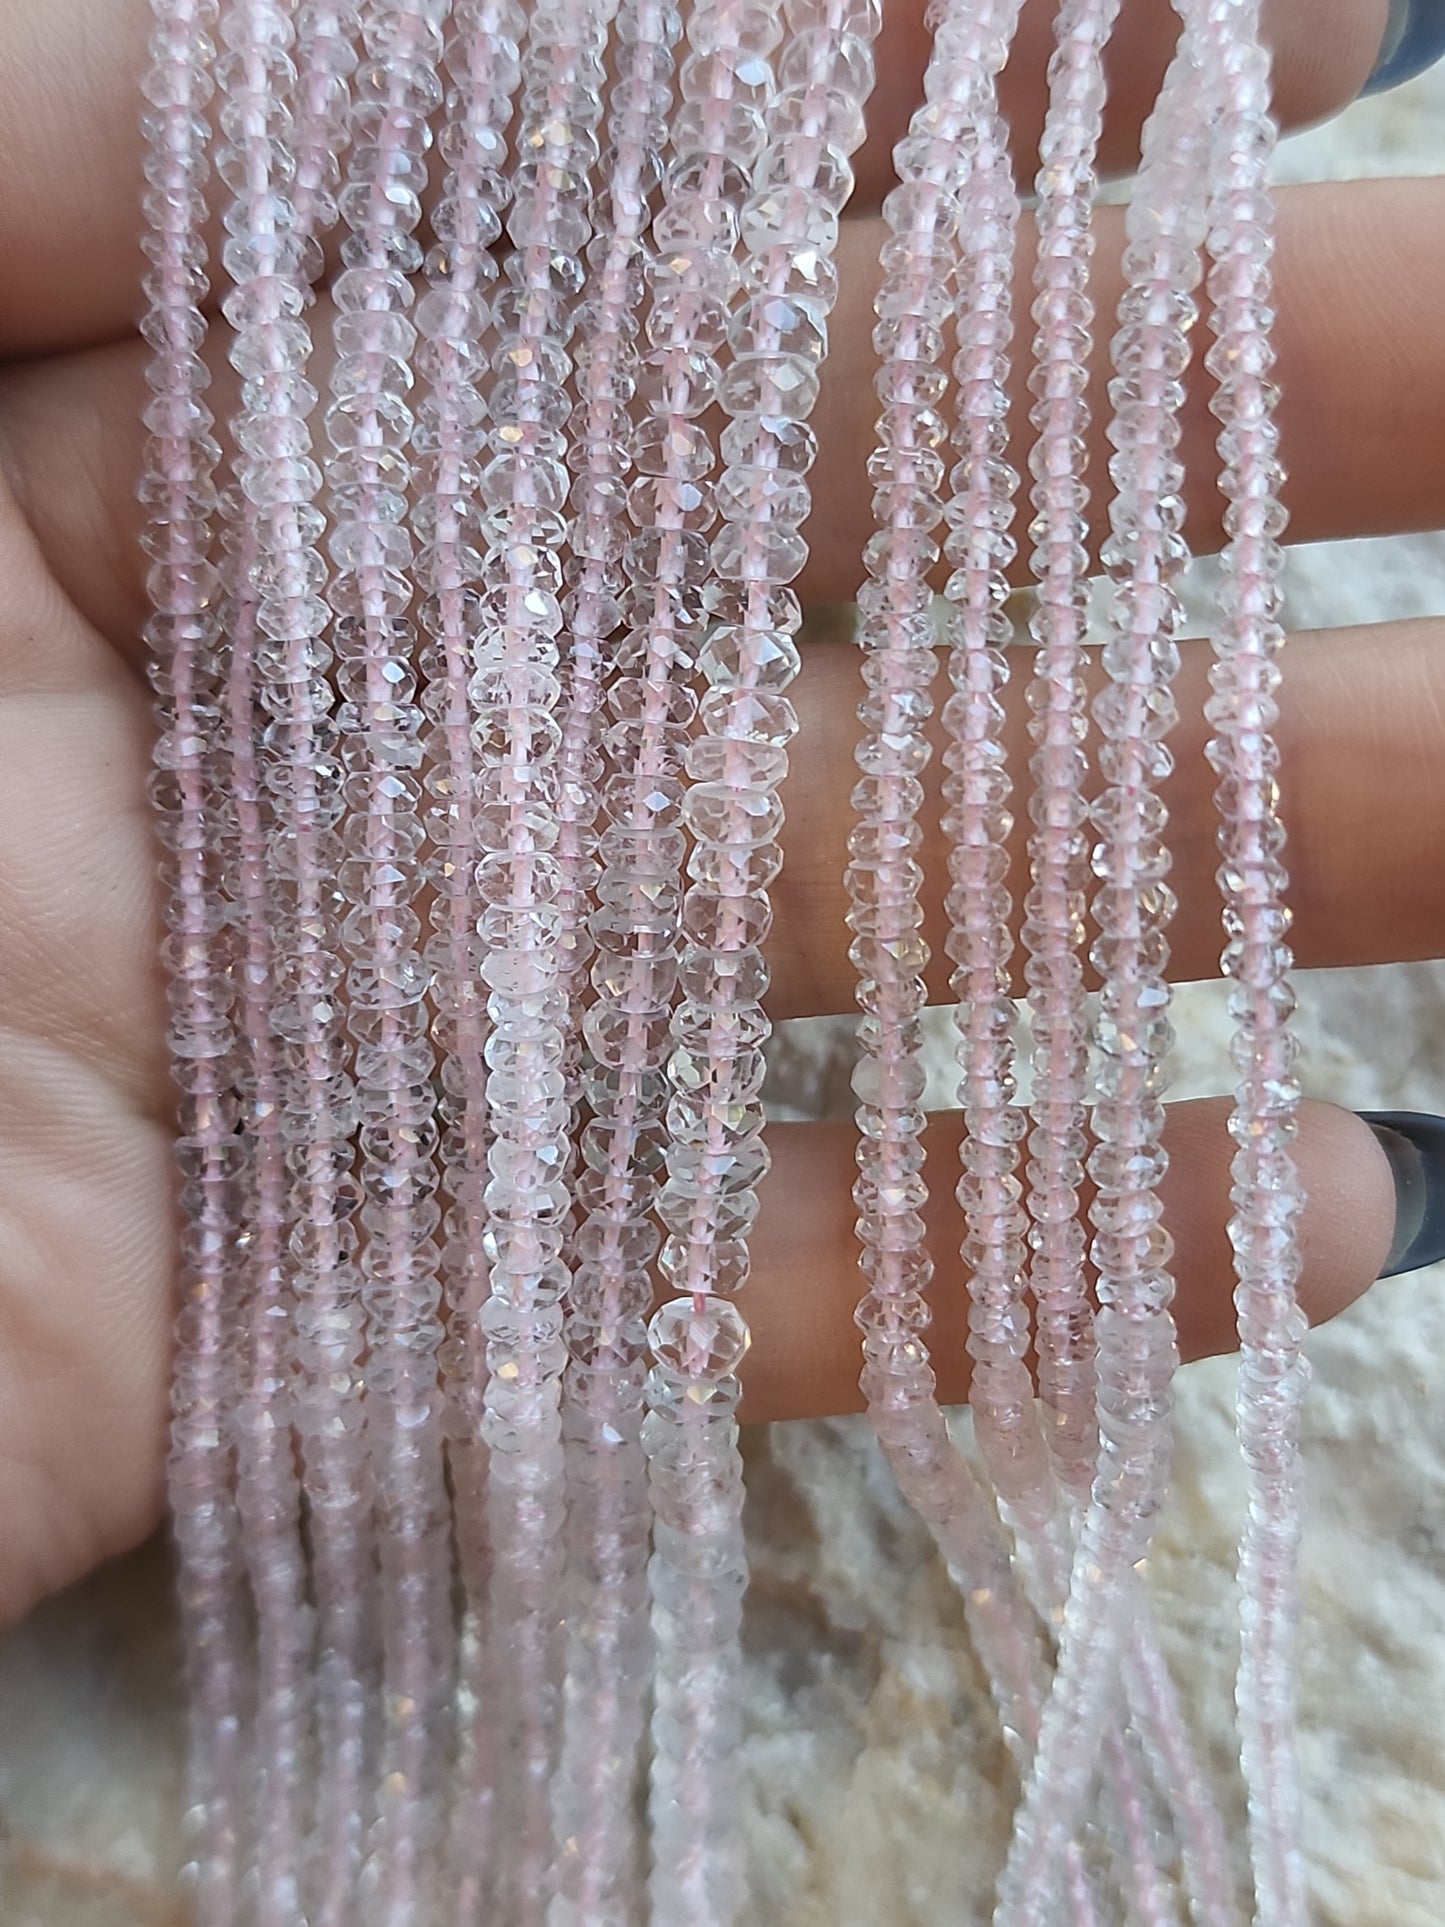 Crafting supplies such as faceted morganite beads available at wholesale and retail prices, only at our crystal shop in San Diego!